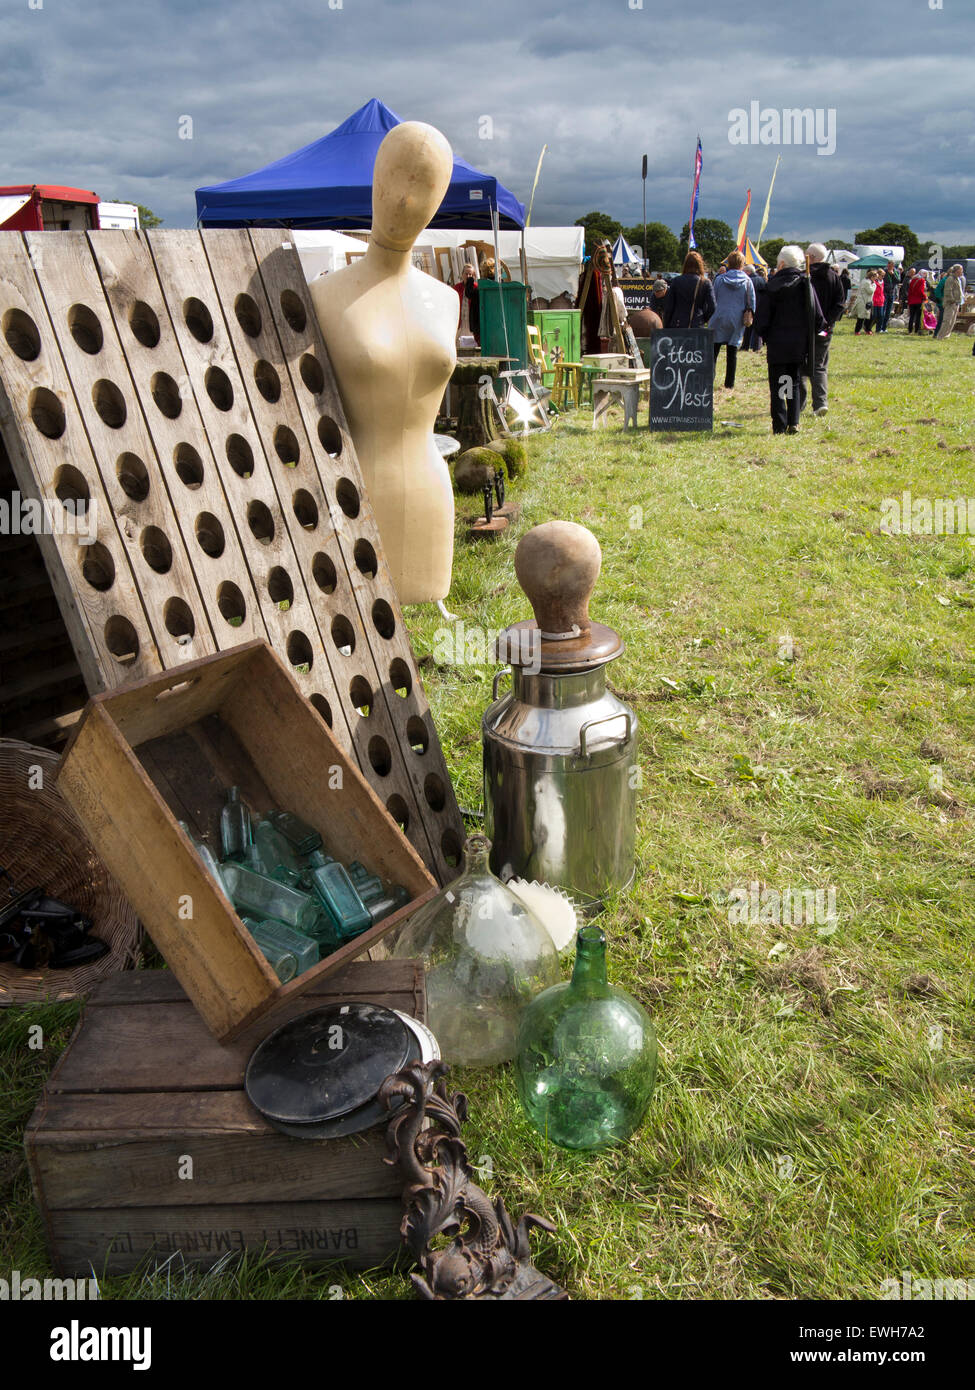 UK, England, Cheshire, Tabley, Cheshire Showground, Decorative Home & Salvage Show, stalls selling antiques Stock Photo